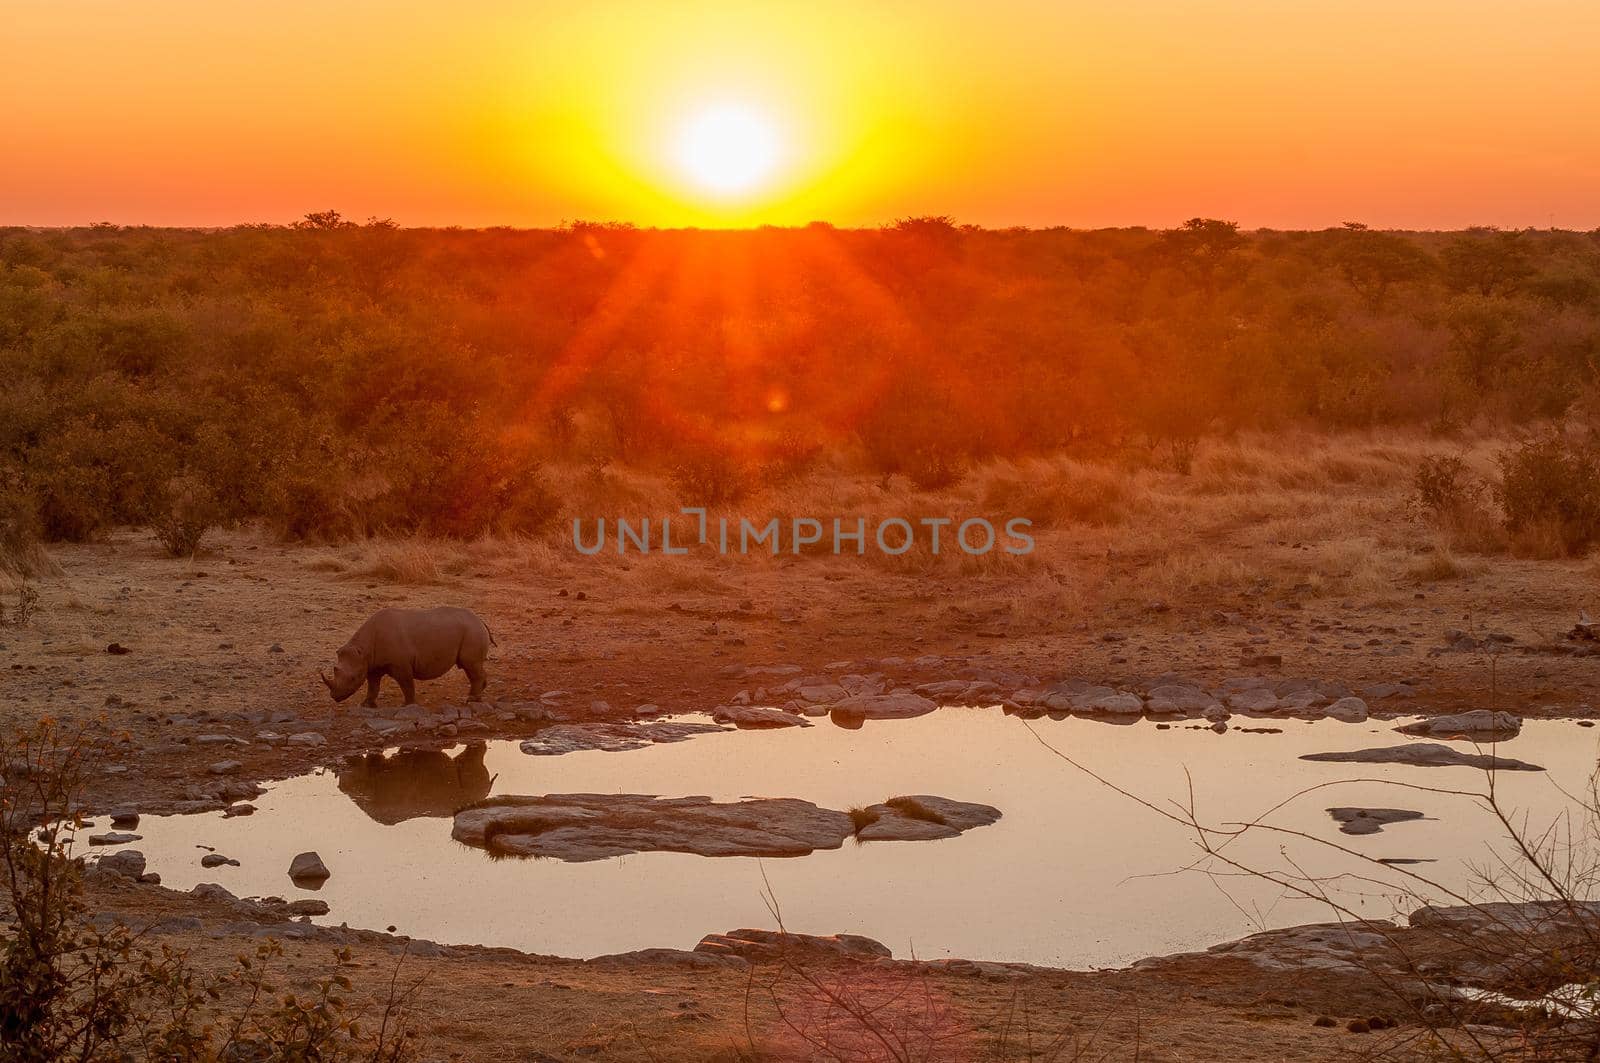 A black rhinoceros, browser, Diceros bicornis, with a sunset backdrop at a waterhole in northern Namibia